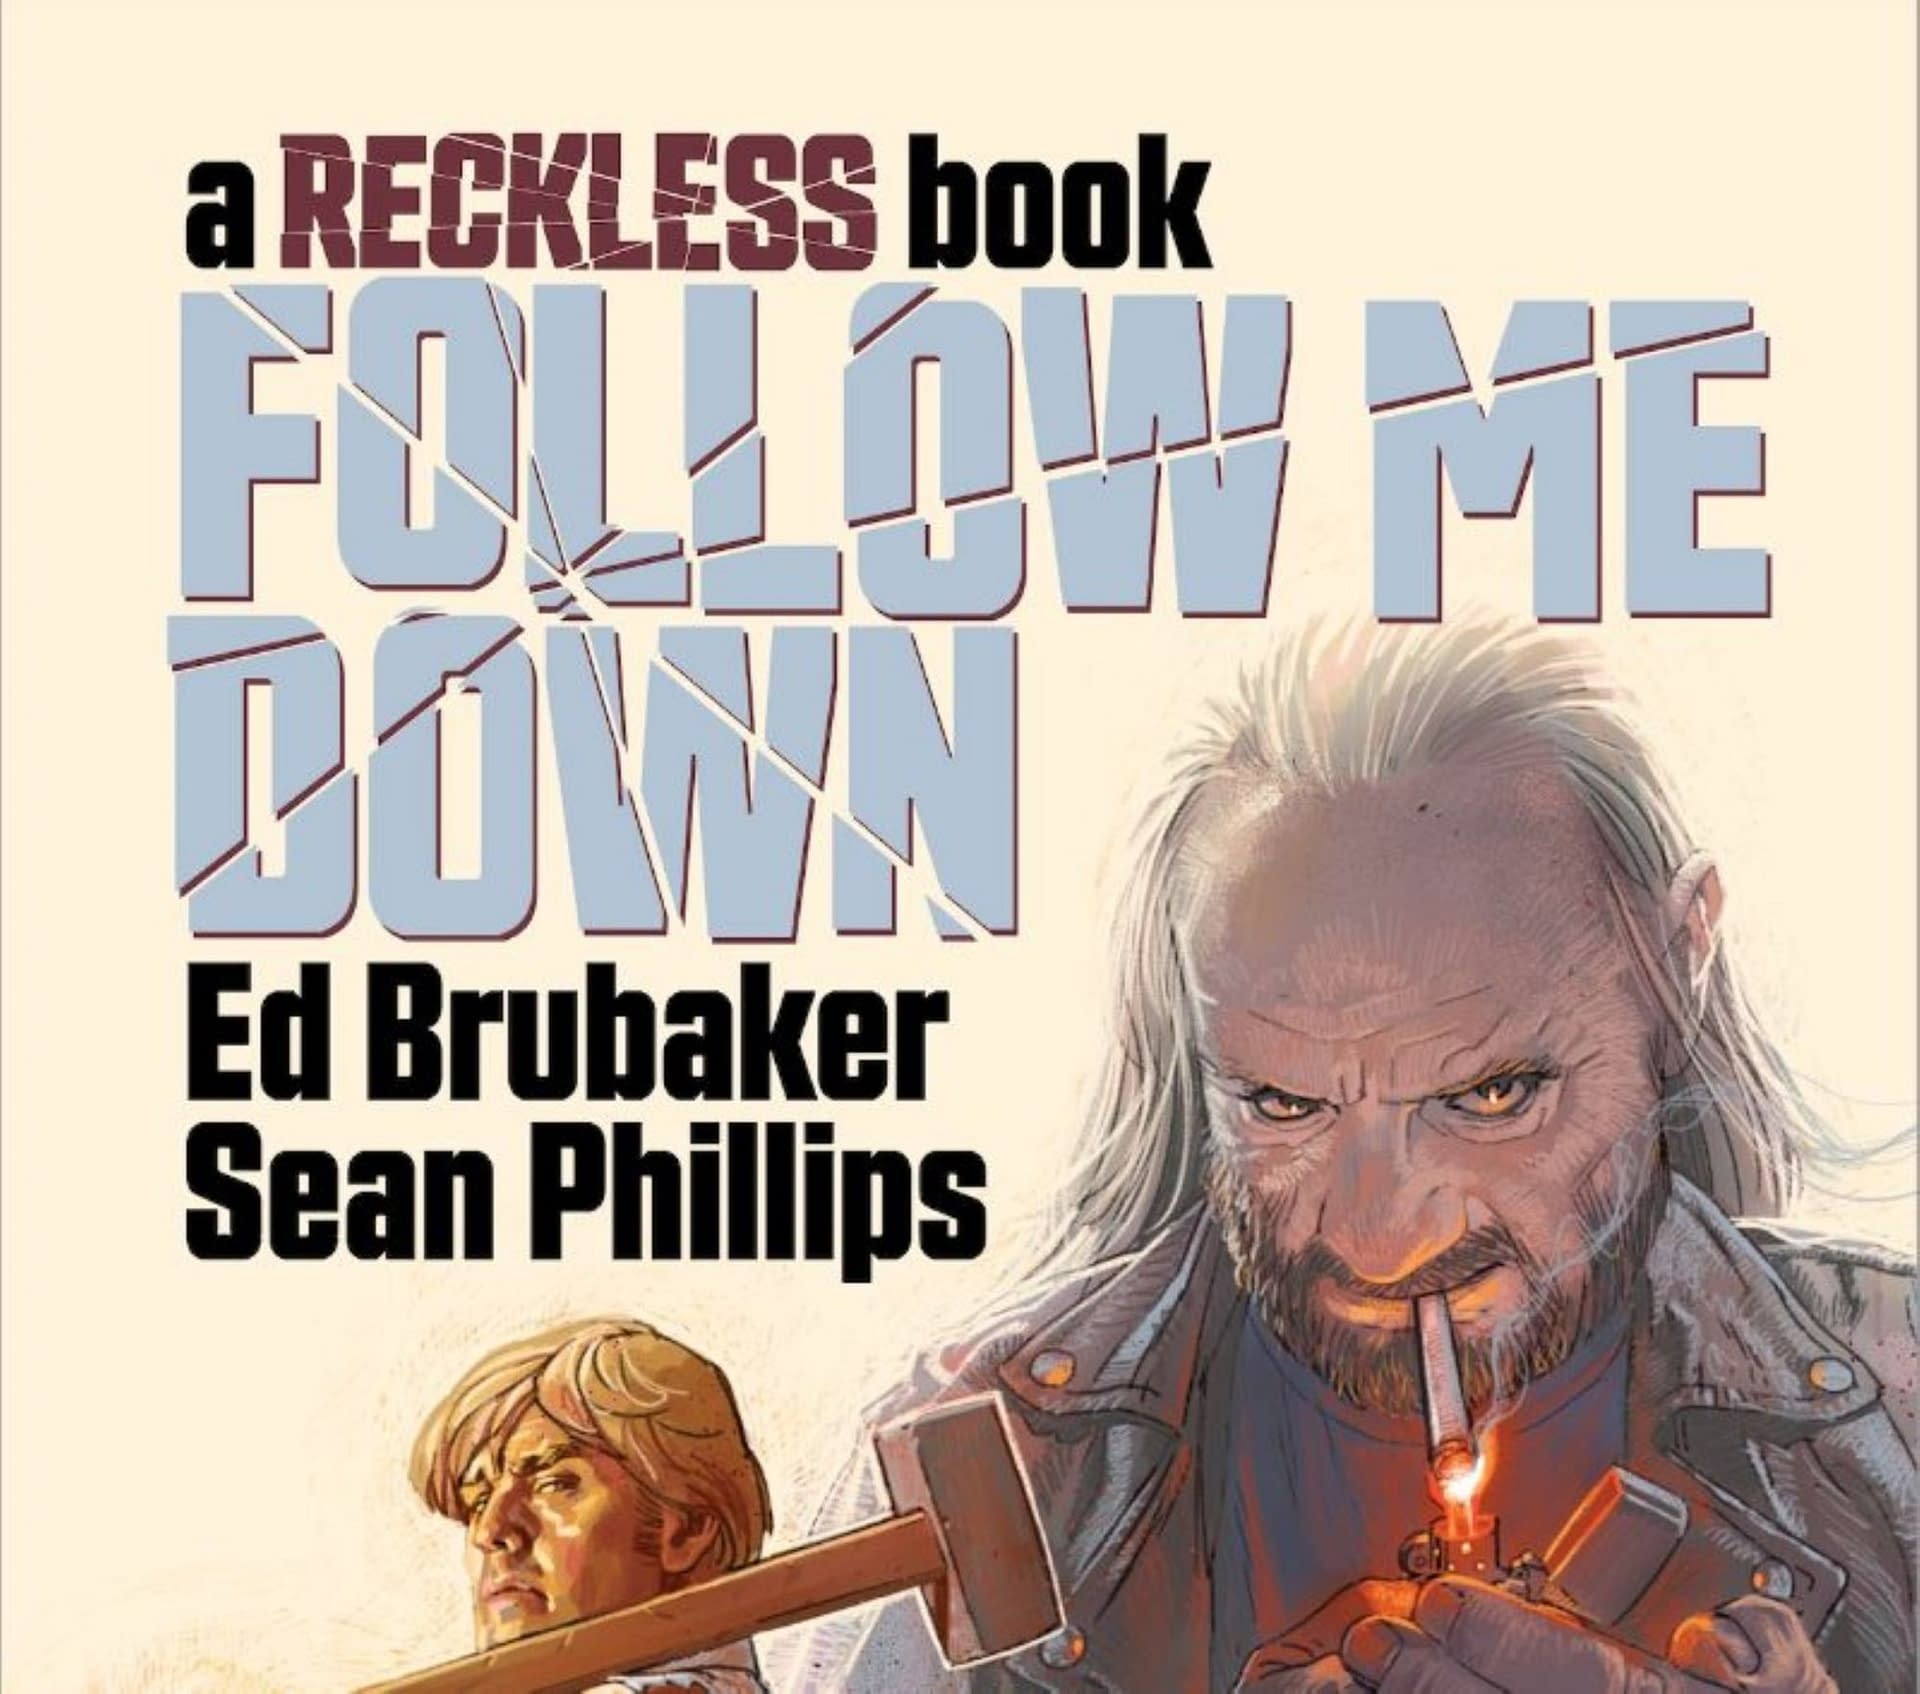 Follow Me Down The Fifth Reckless Ogn By Ed Brubaker And Sean Phillips